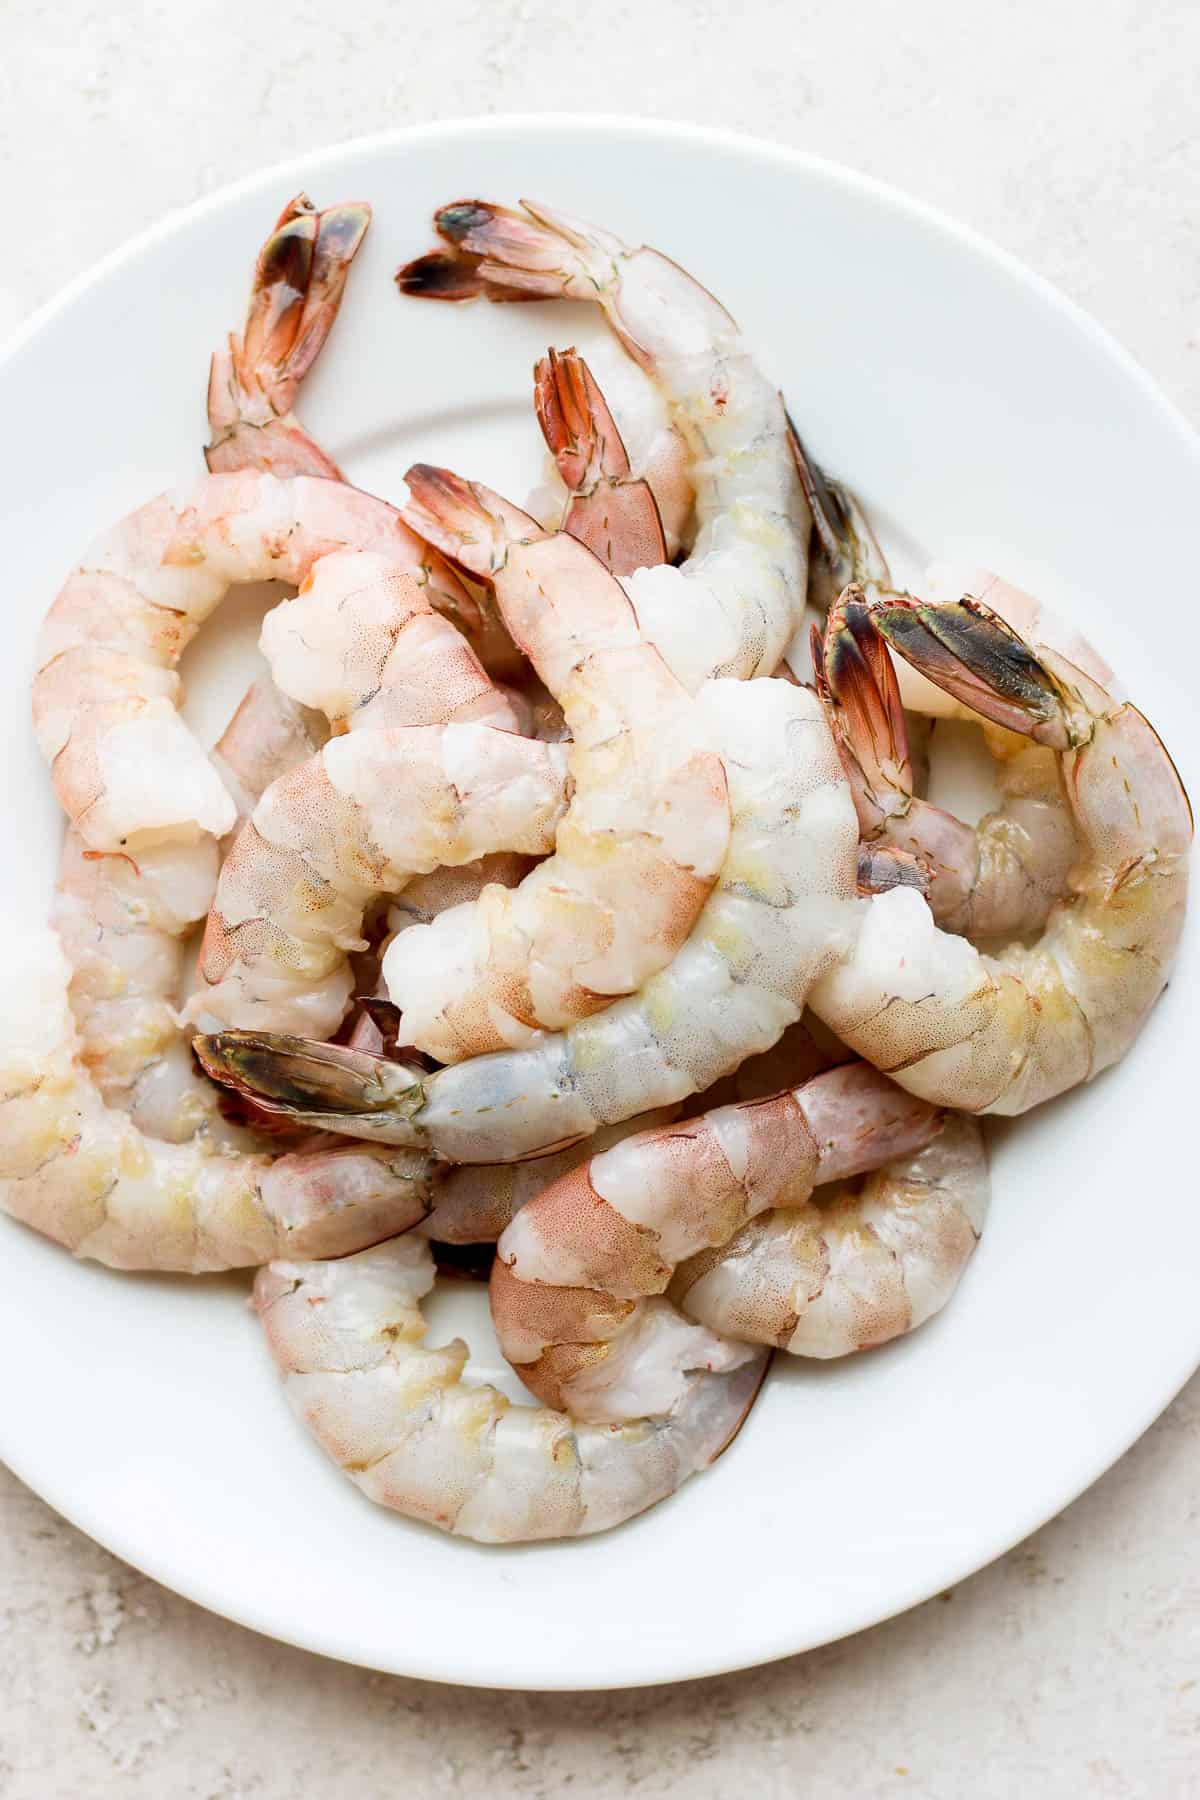 Raw shrimp with shells removed.